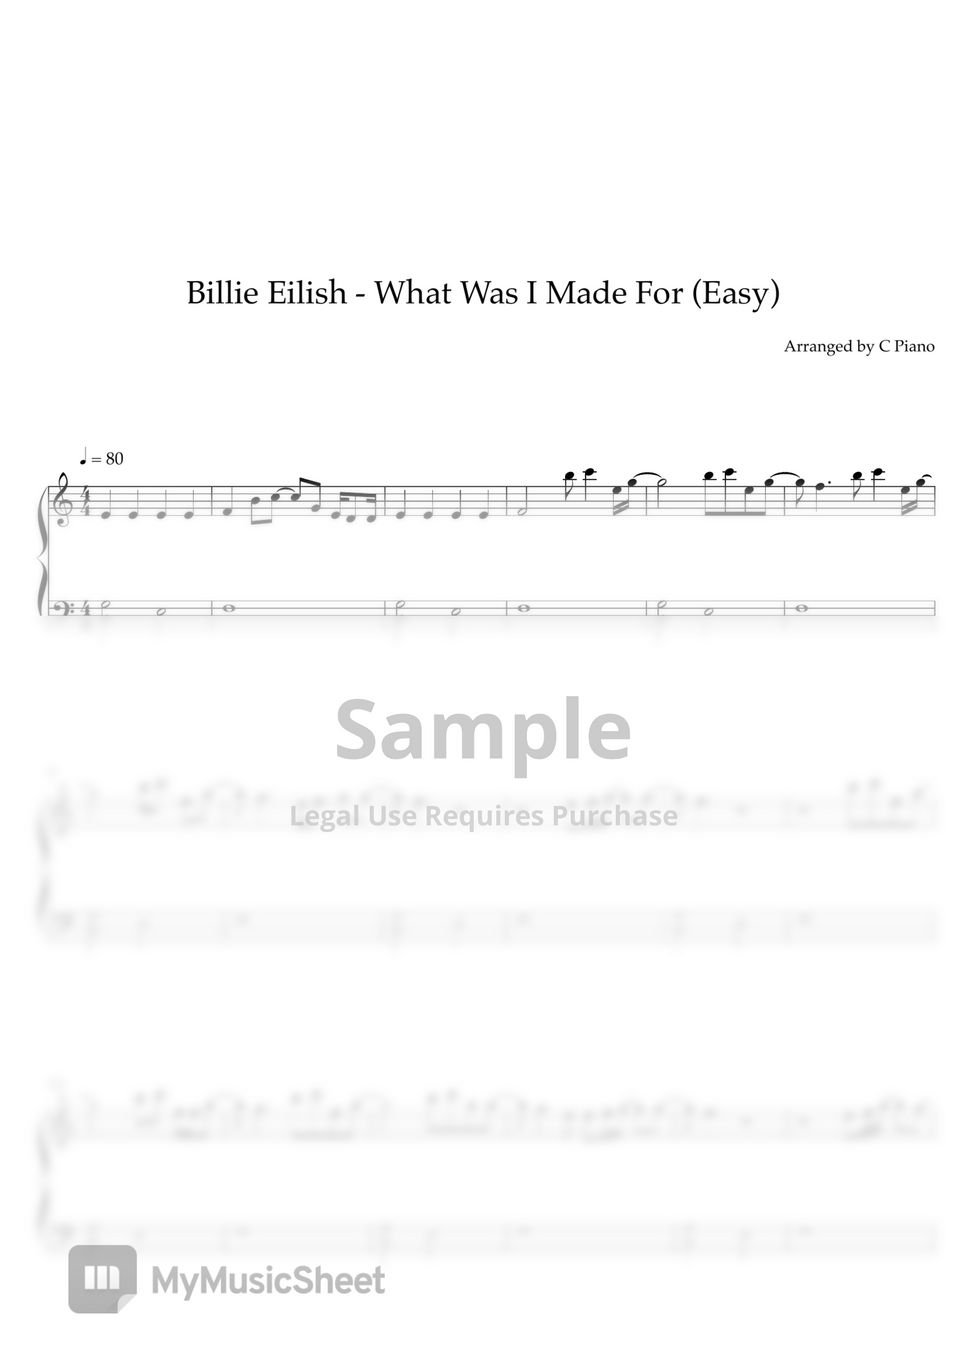 Billie Eilish - What Was I Made For (Easy Version) by C Piano